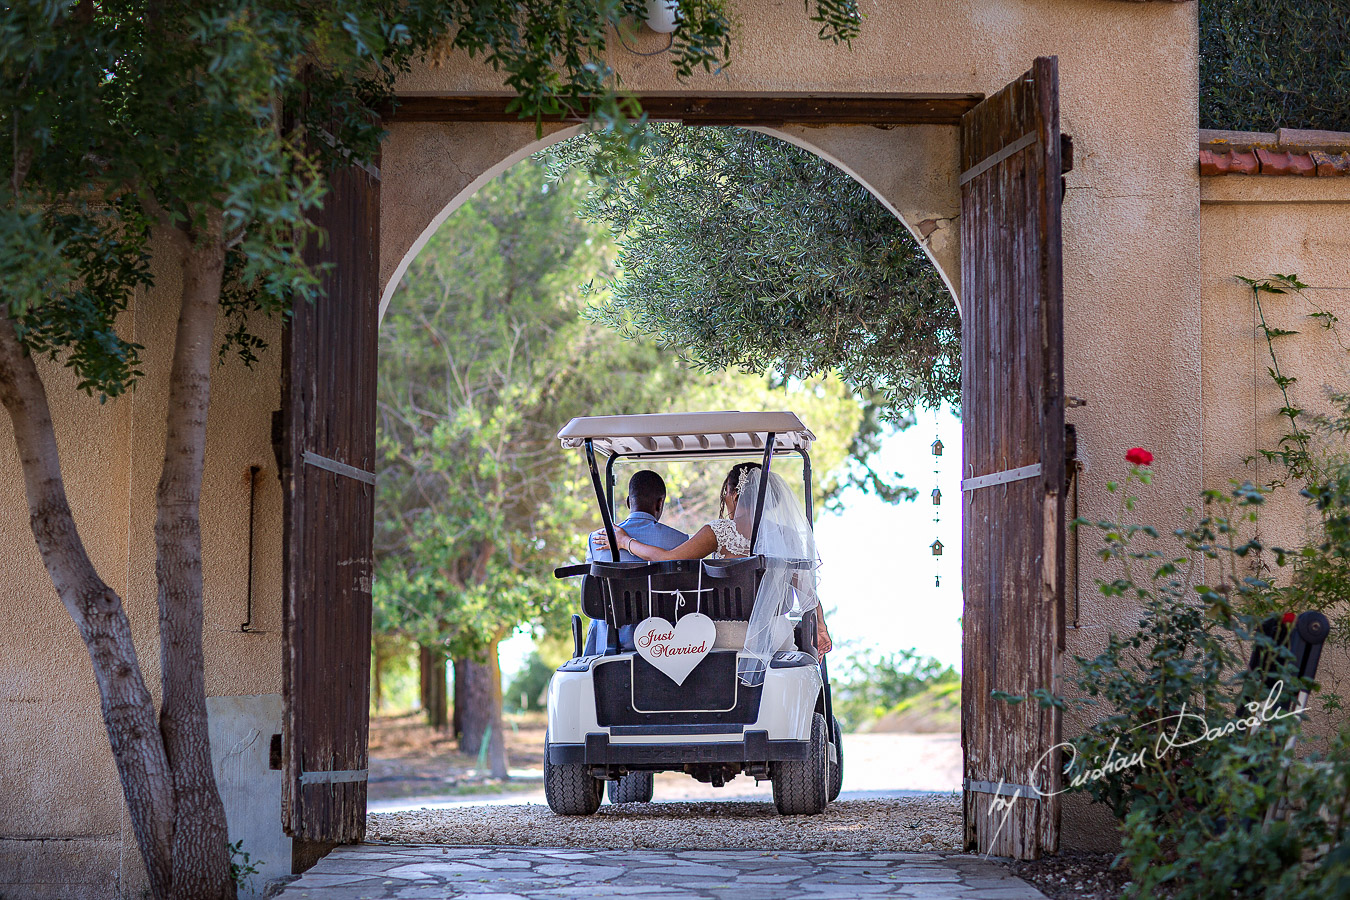 Bride and groom getting away in the bridal bug, moments captured at a wedding at Minthis Hills in Cyprus, by Cristian Dascalu.